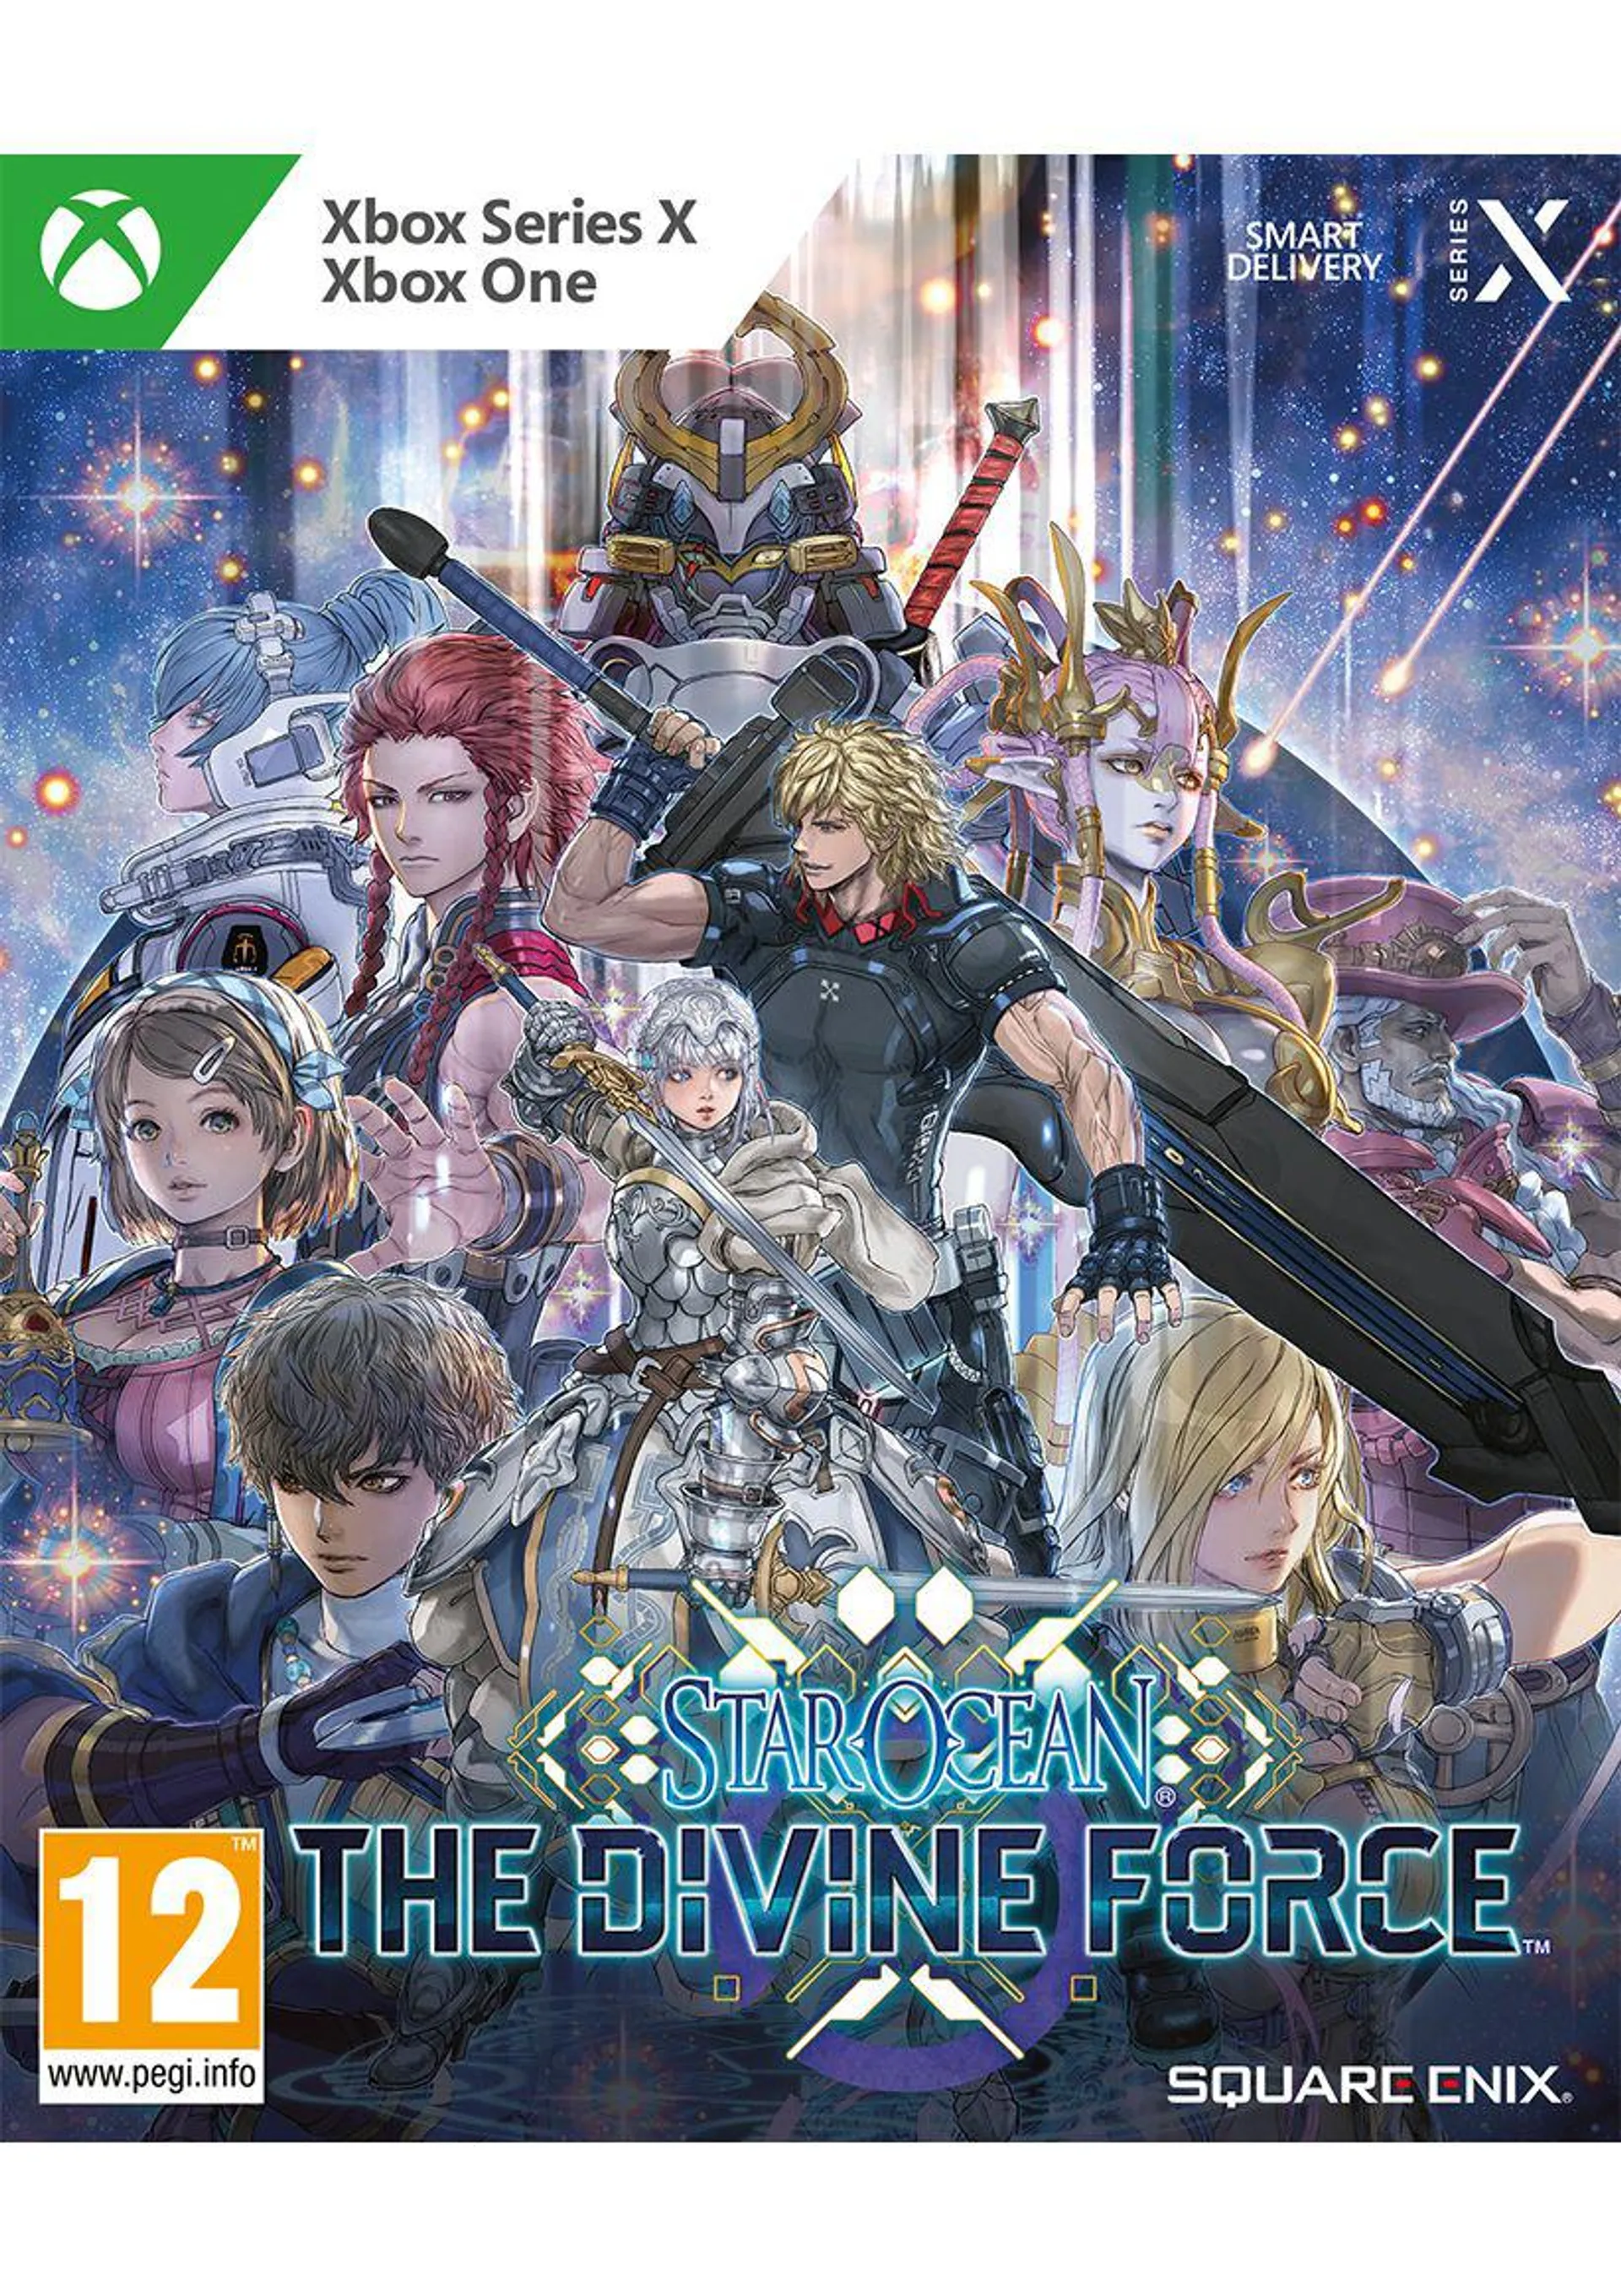 Star Ocean: The Divine Force on Xbox Series X | S